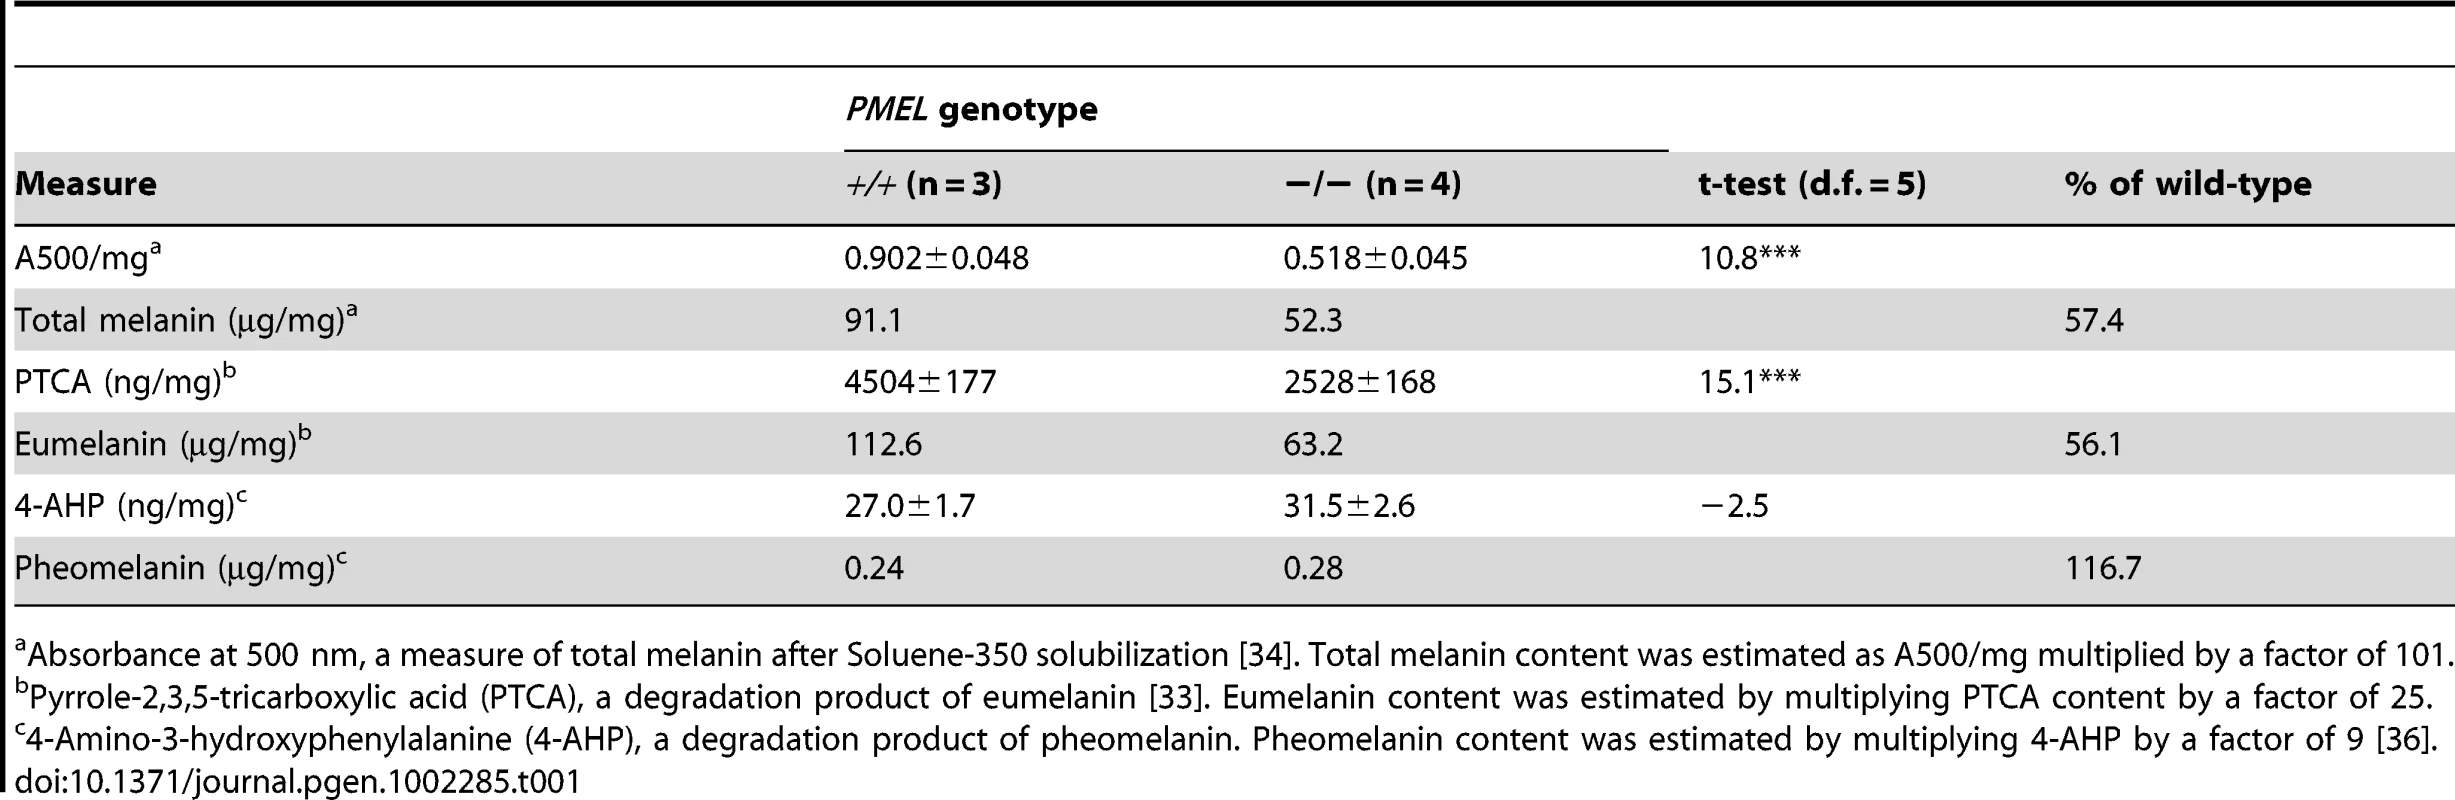 Content of total melanin, eumelanin, and pheomelanin in <i>wild-type</i> and <i>PMEL<sup>−/−</sup></i> mice on a C57BL/6 background (<i>Asip<sup>a/a</sup></i>).